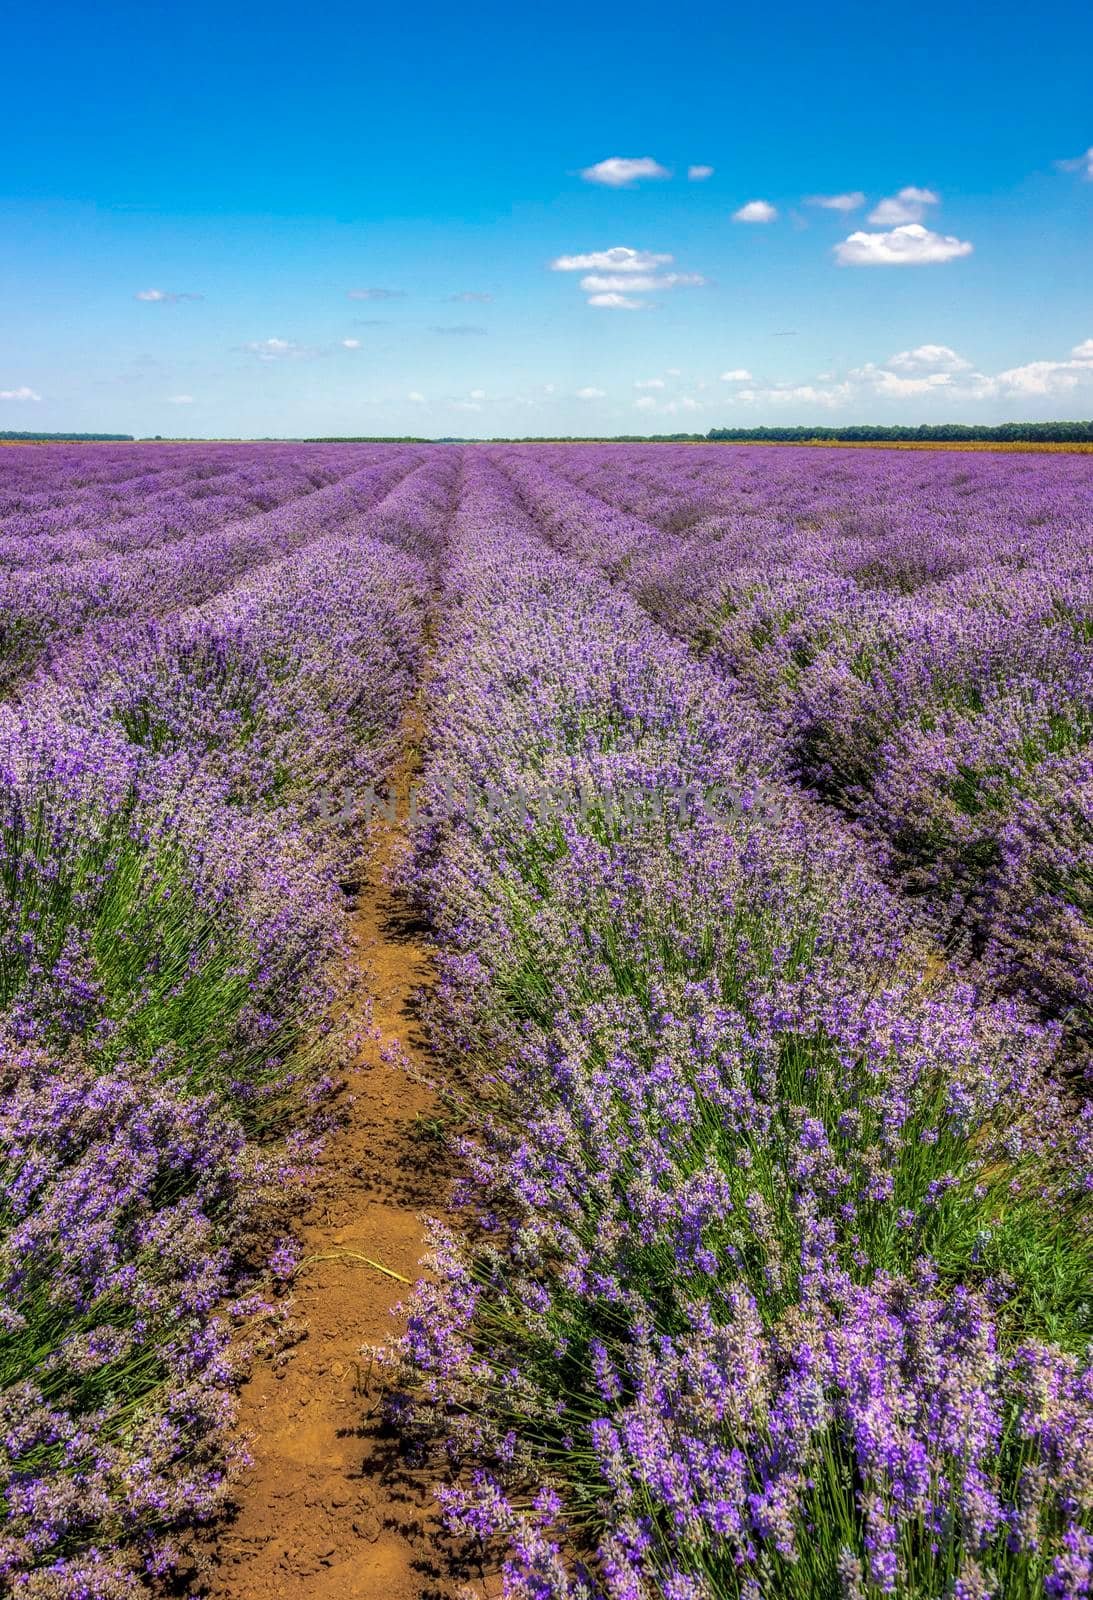 Lavender flower blooming scented fields in endless rows. Vertical view.